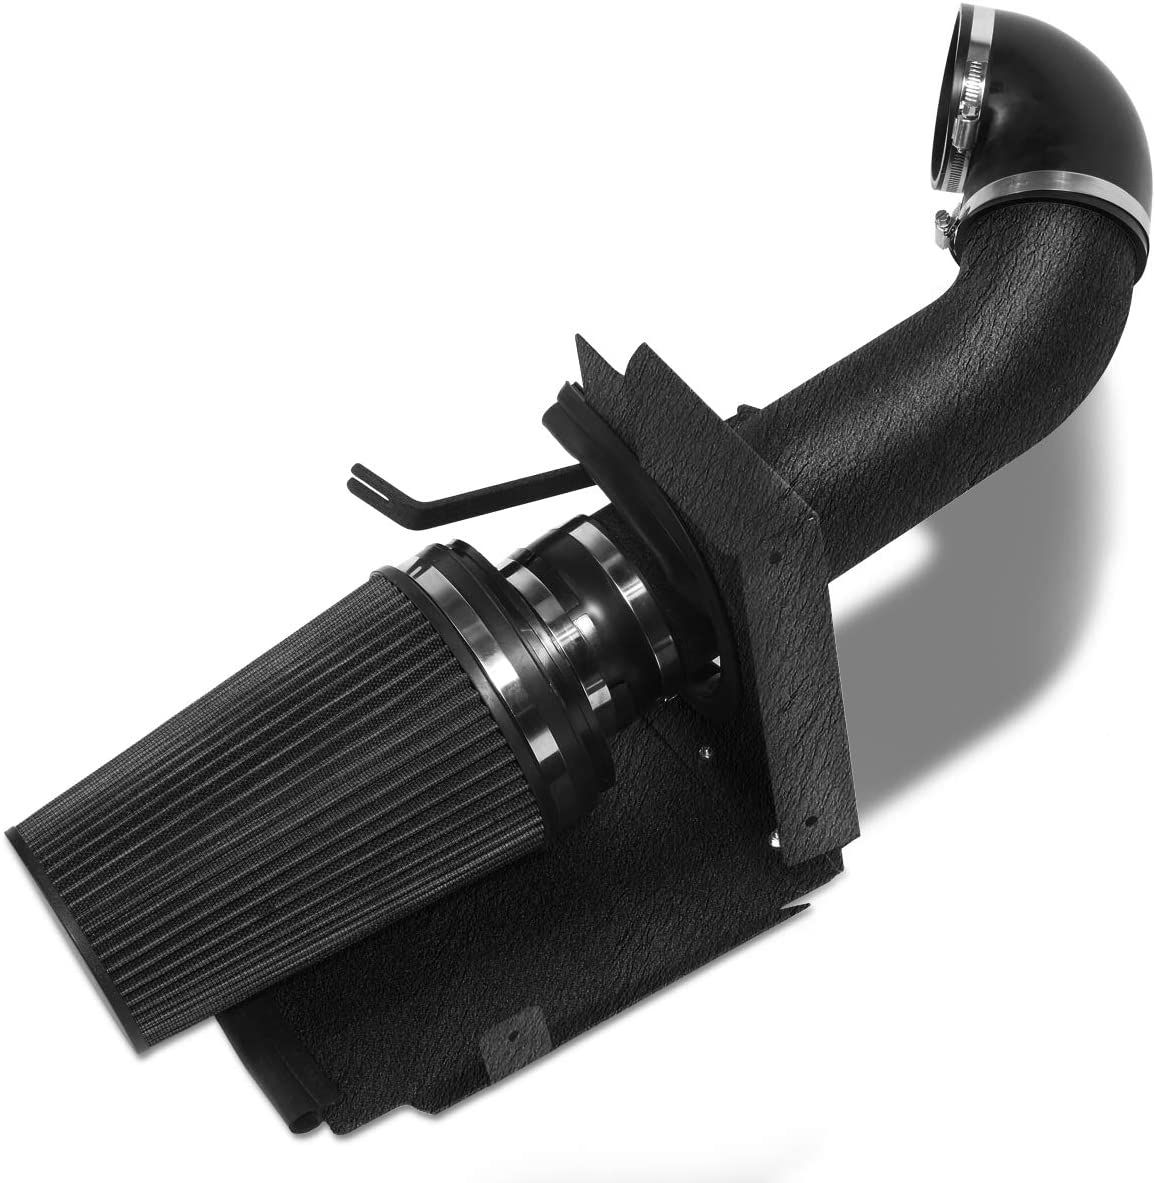 The Cold Air Intake From MOOSUN.